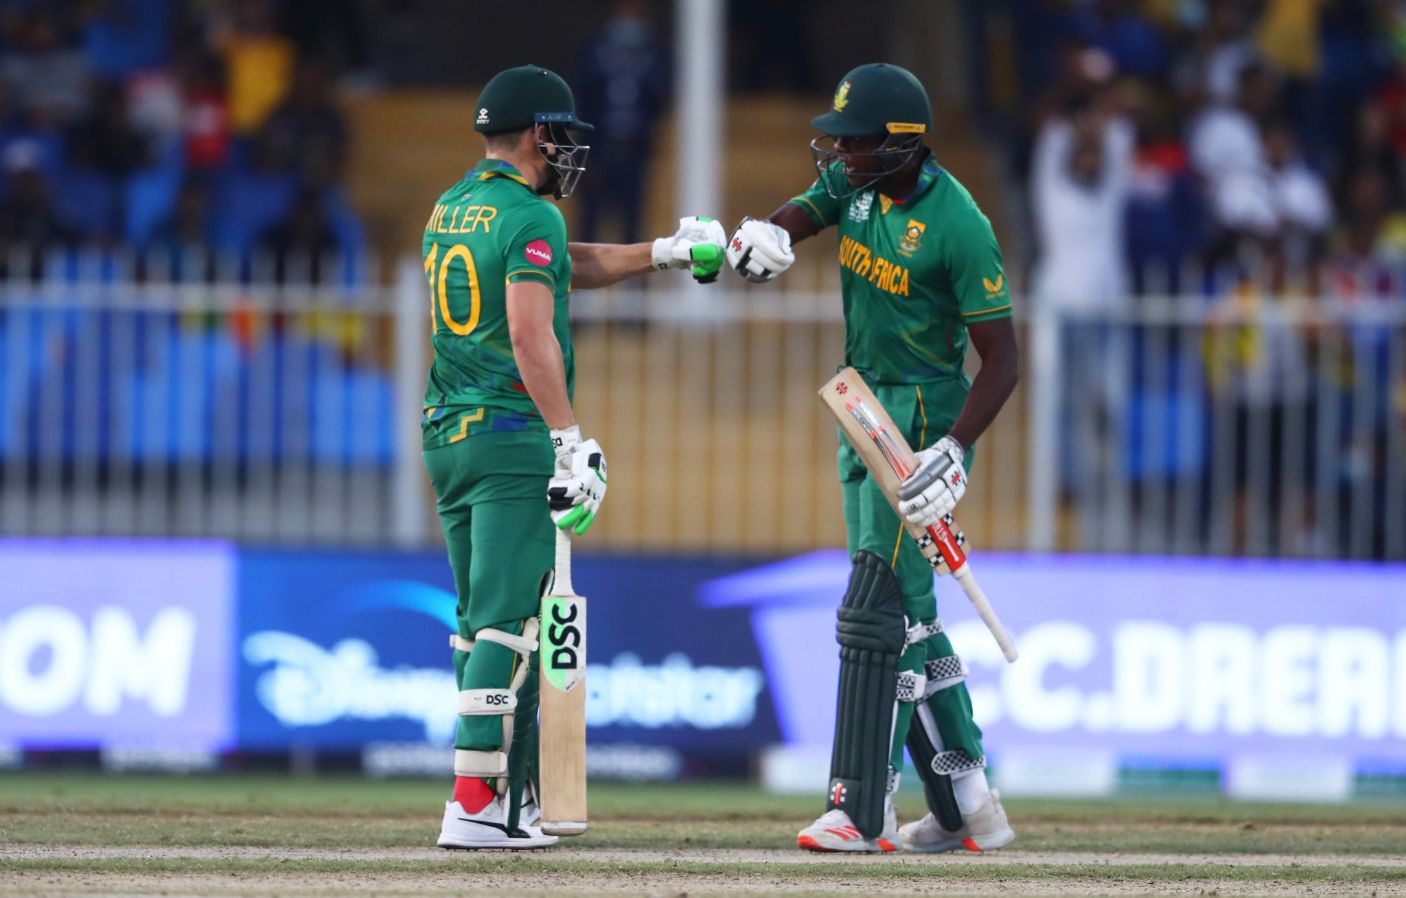 T20 World Cup | SA vs BAN: Underdog at start, Proteas desperate to sustain hard-earned consistency